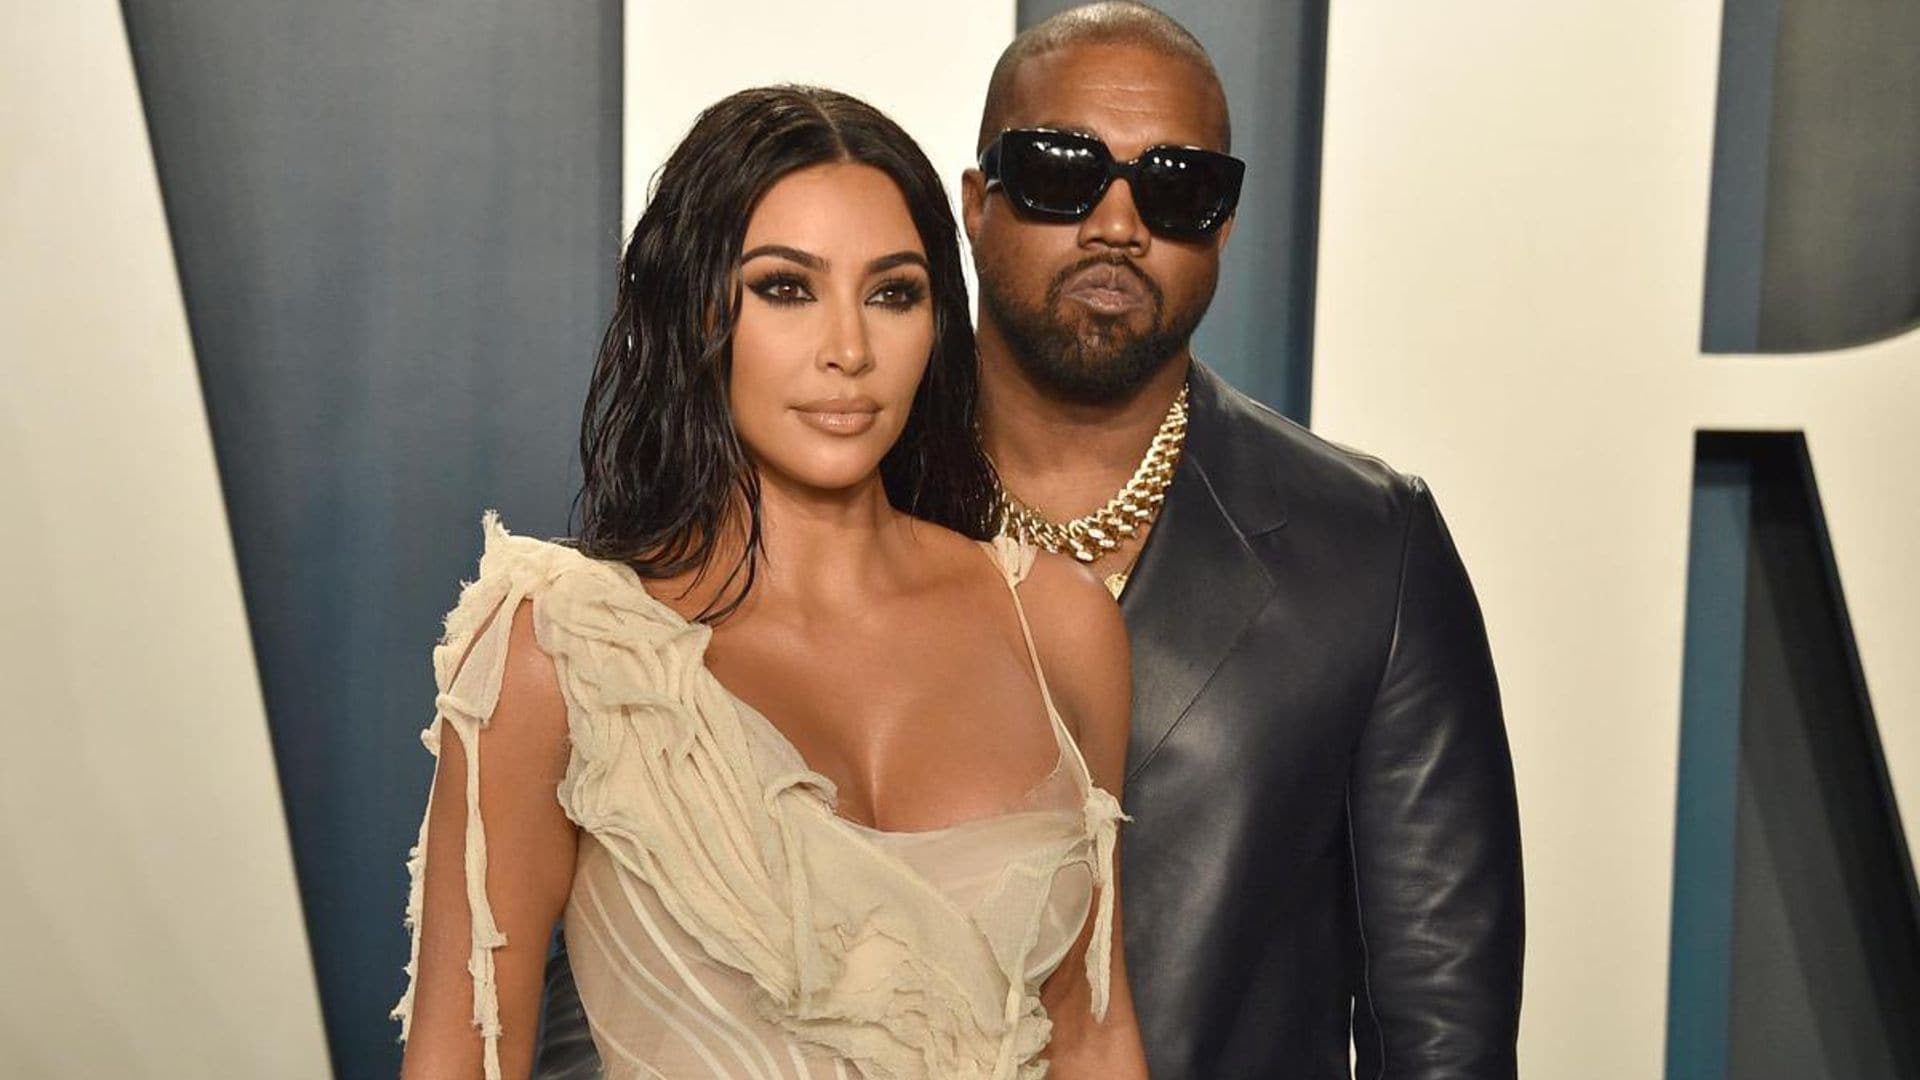 Kim Kardashian and Kanye West finalize their divorce: Kim will receive $200k in child support